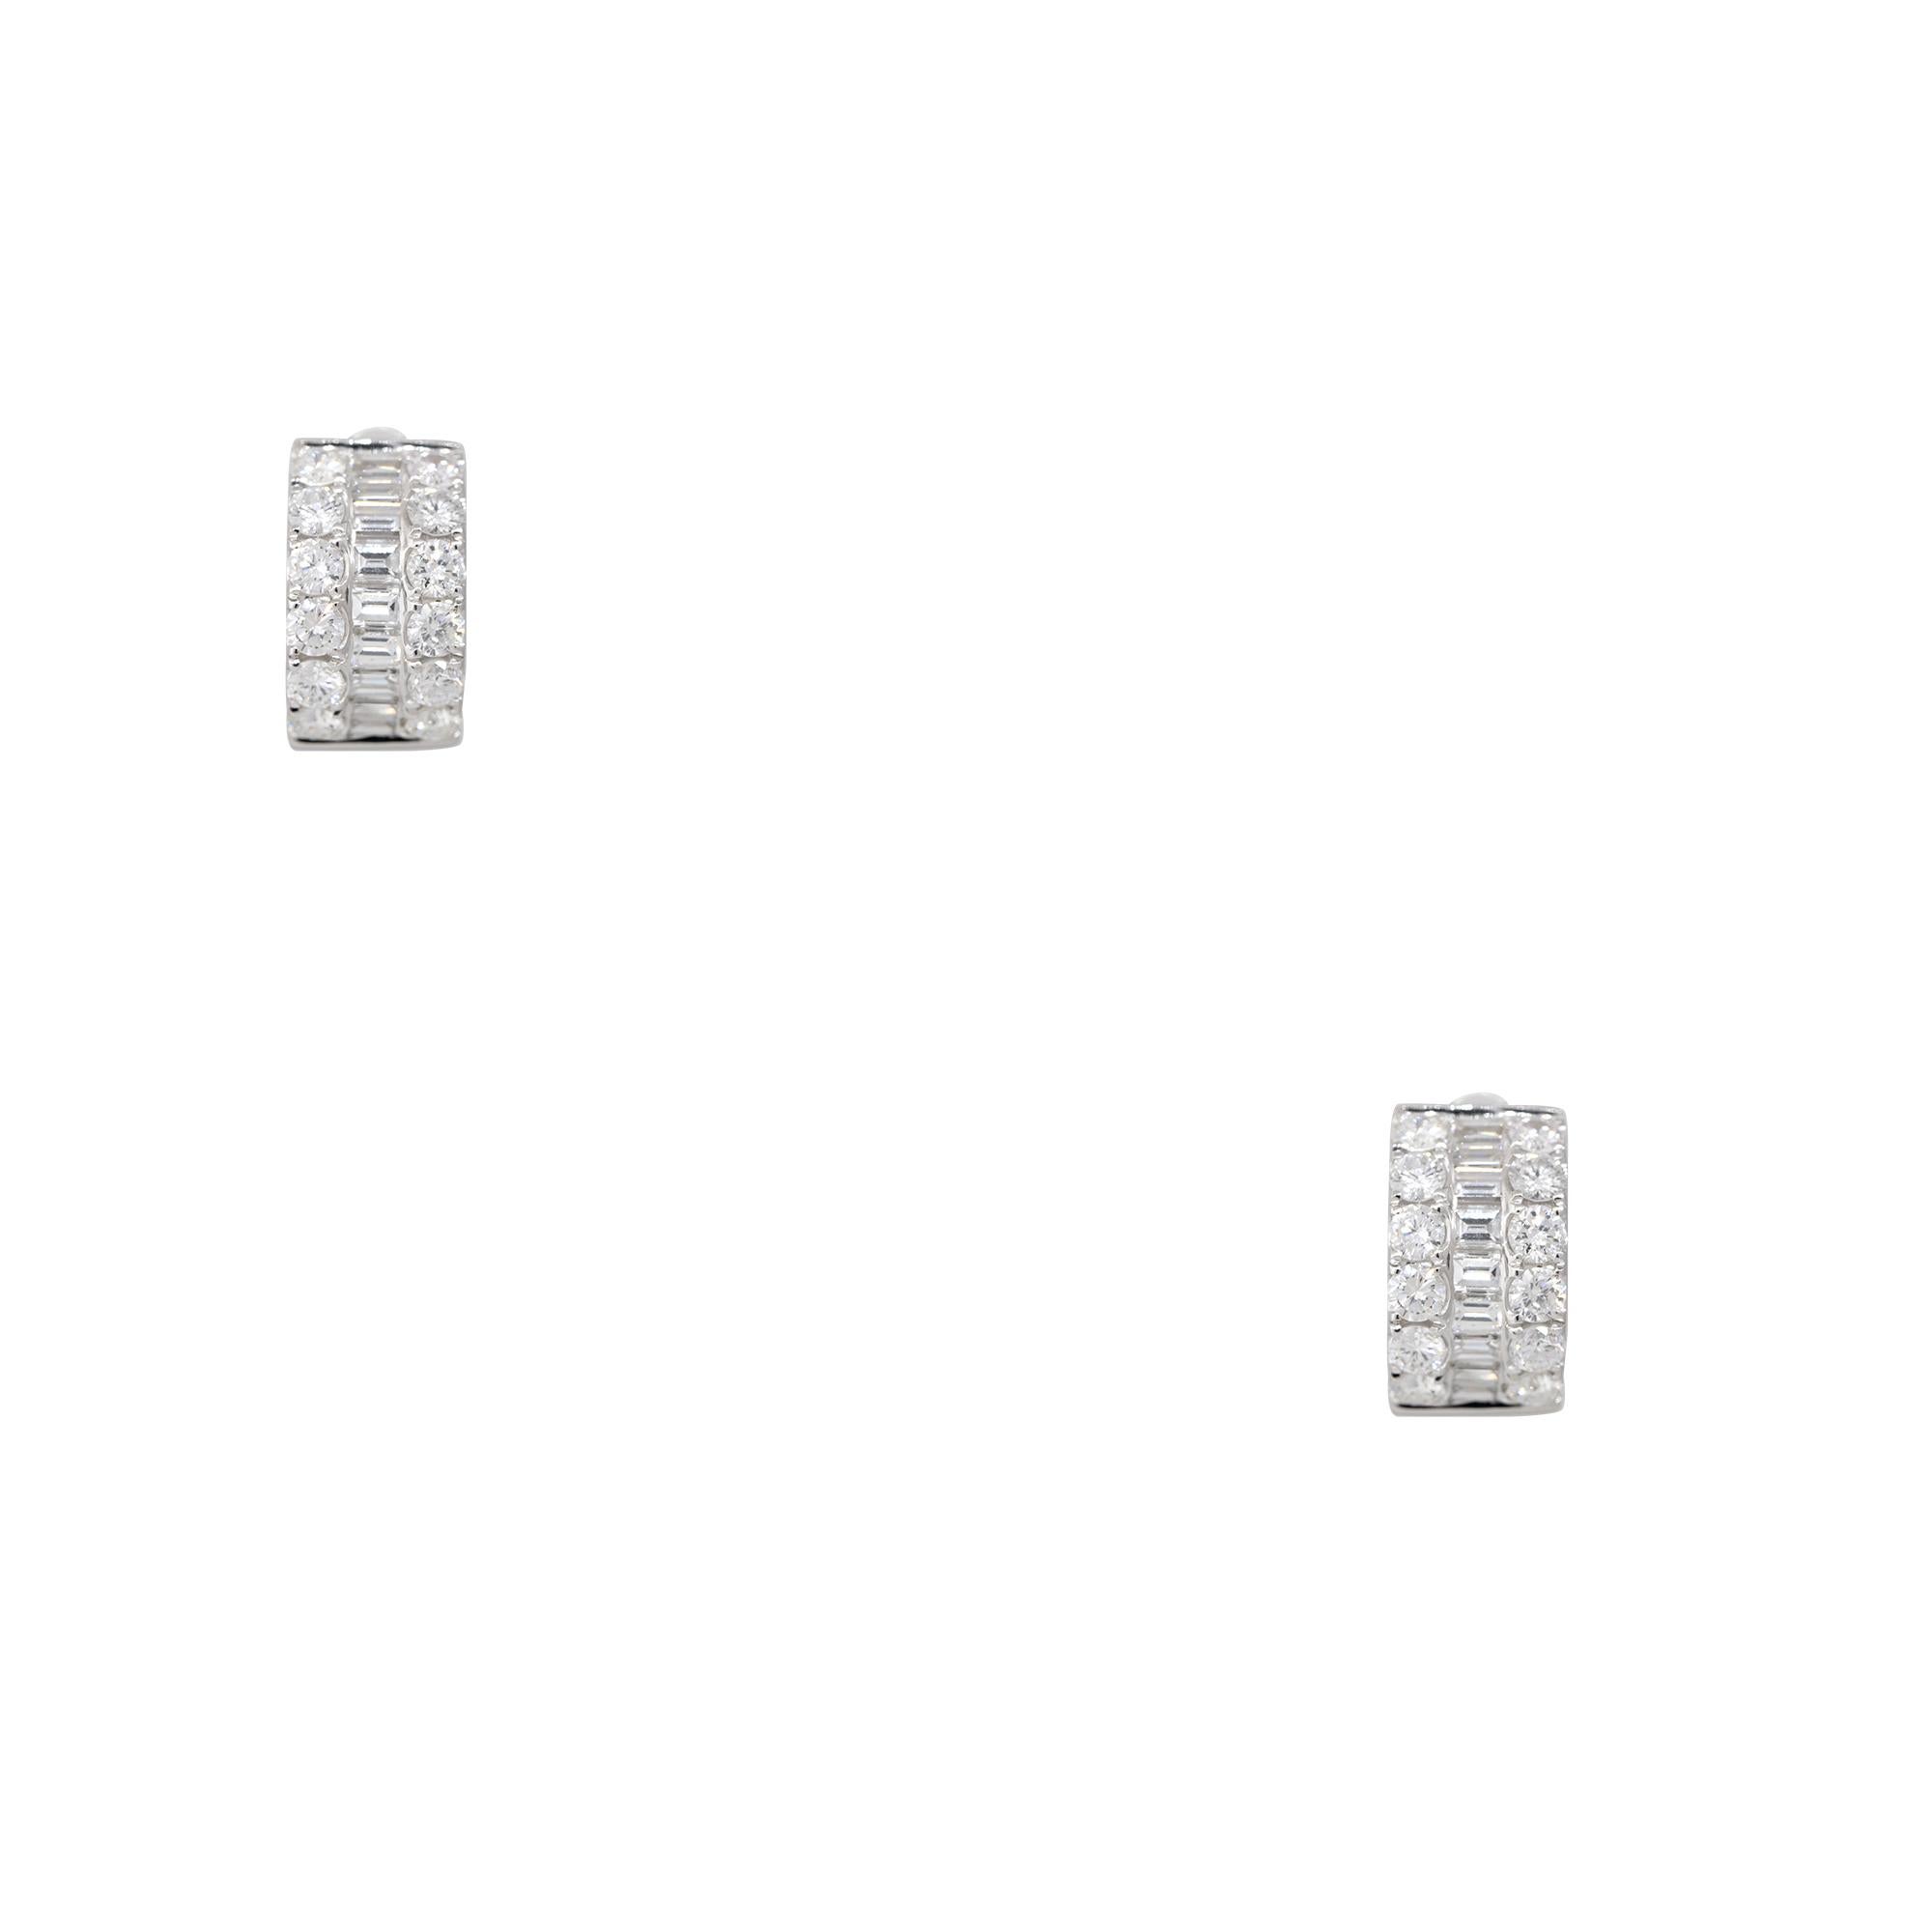 18k White Gold 2.10ctw Round Brilliant & Baguette Diamond Mini Huggie Hoop Earrings
Material: 18k White Gold
Diamond Details: There are approximately 2.10 carats of round brilliant and baguette-cut diamonds. All diamonds are approximately F/G in